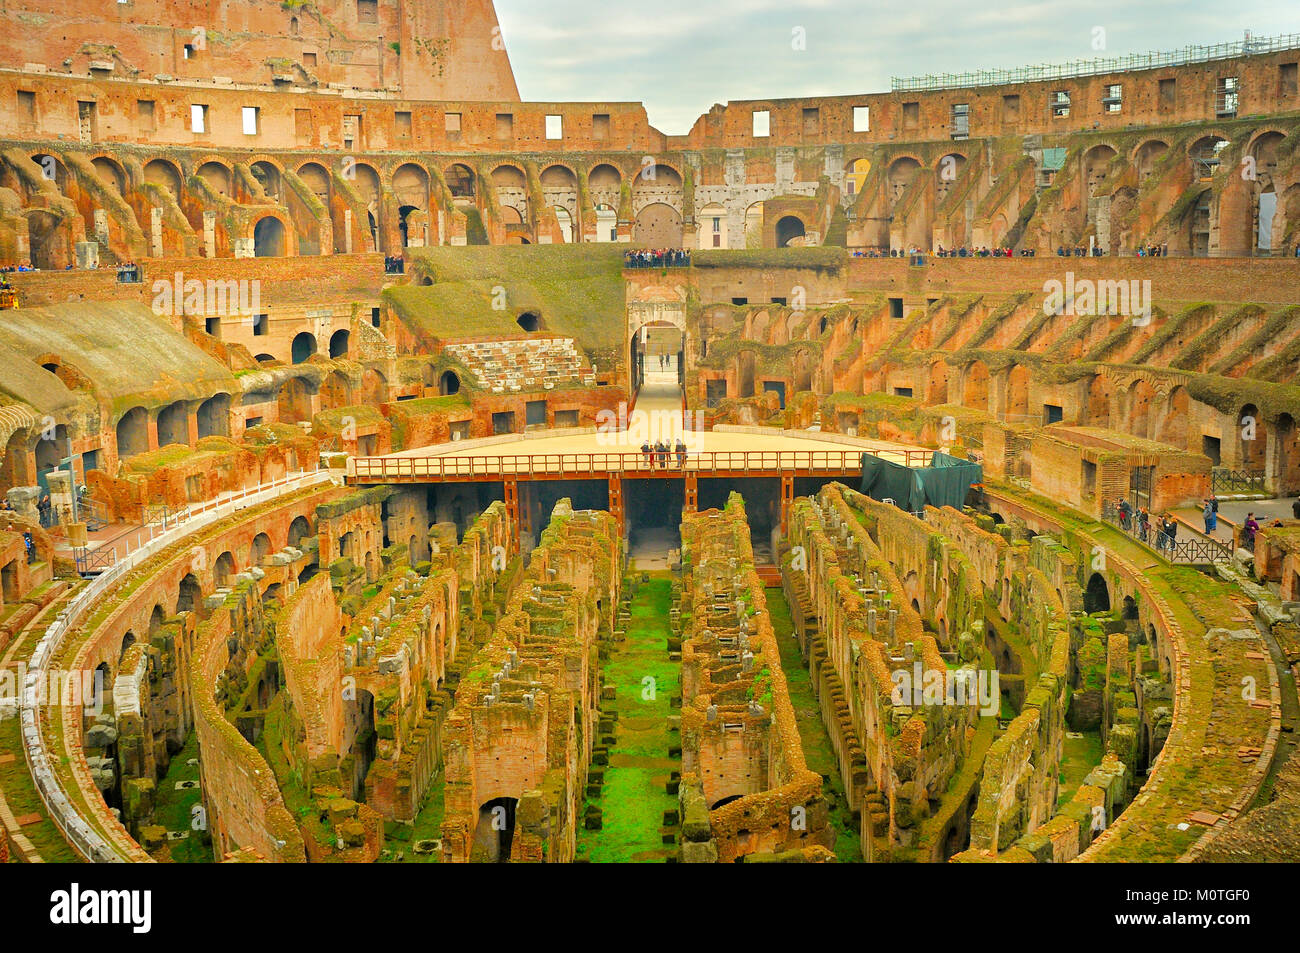 A view of the interior of the Colloseum, Rome Stock Photo